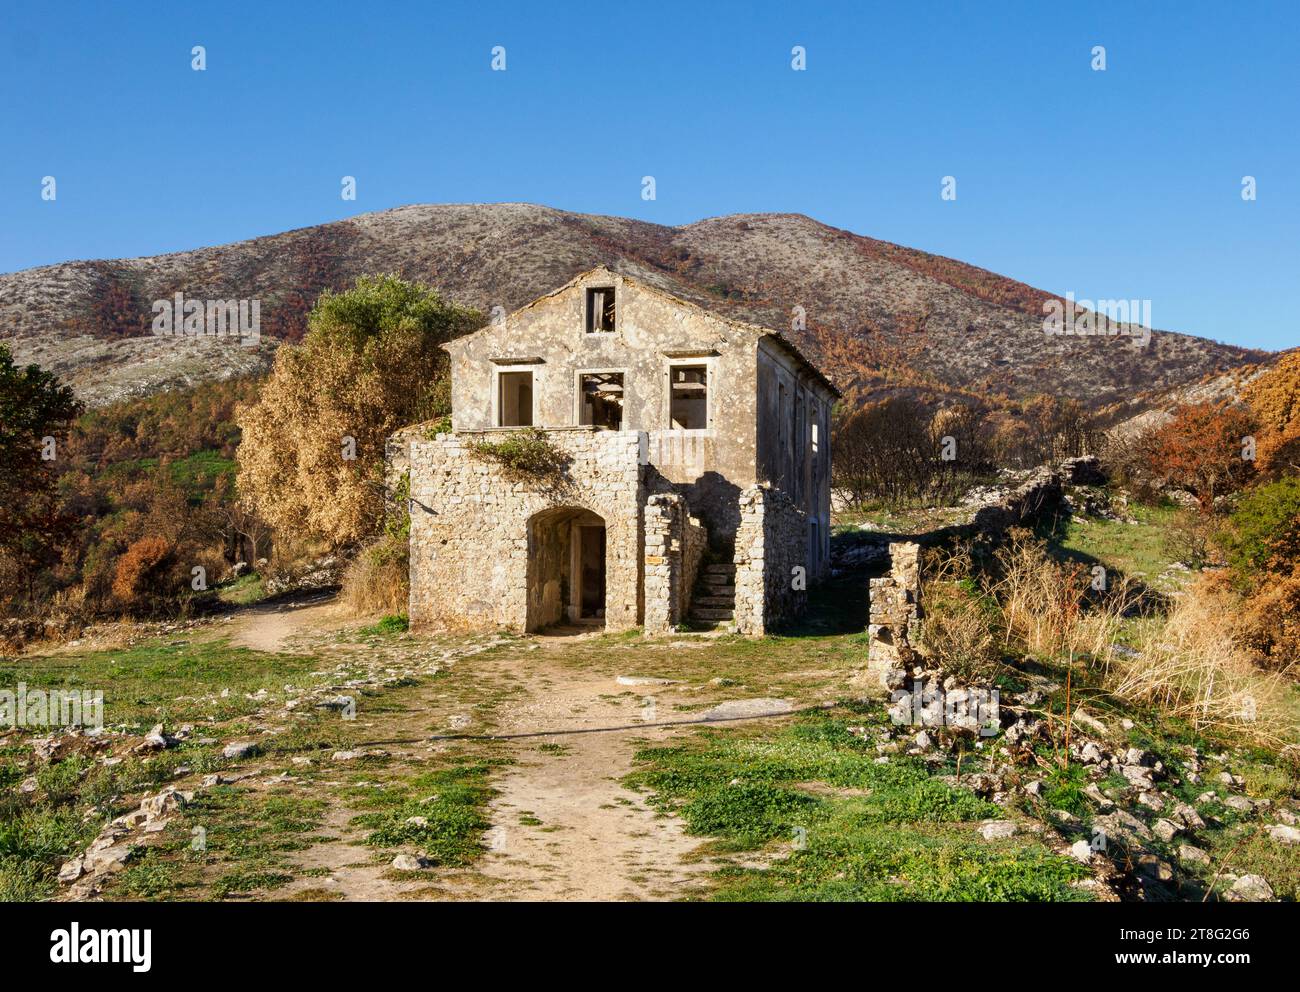 Ruined schoolhouse building in the partially abandoned village of Old Perithia (Palea Perithea) on the high slopes of Mt Pandokratoras in Corfu Greece Stock Photo